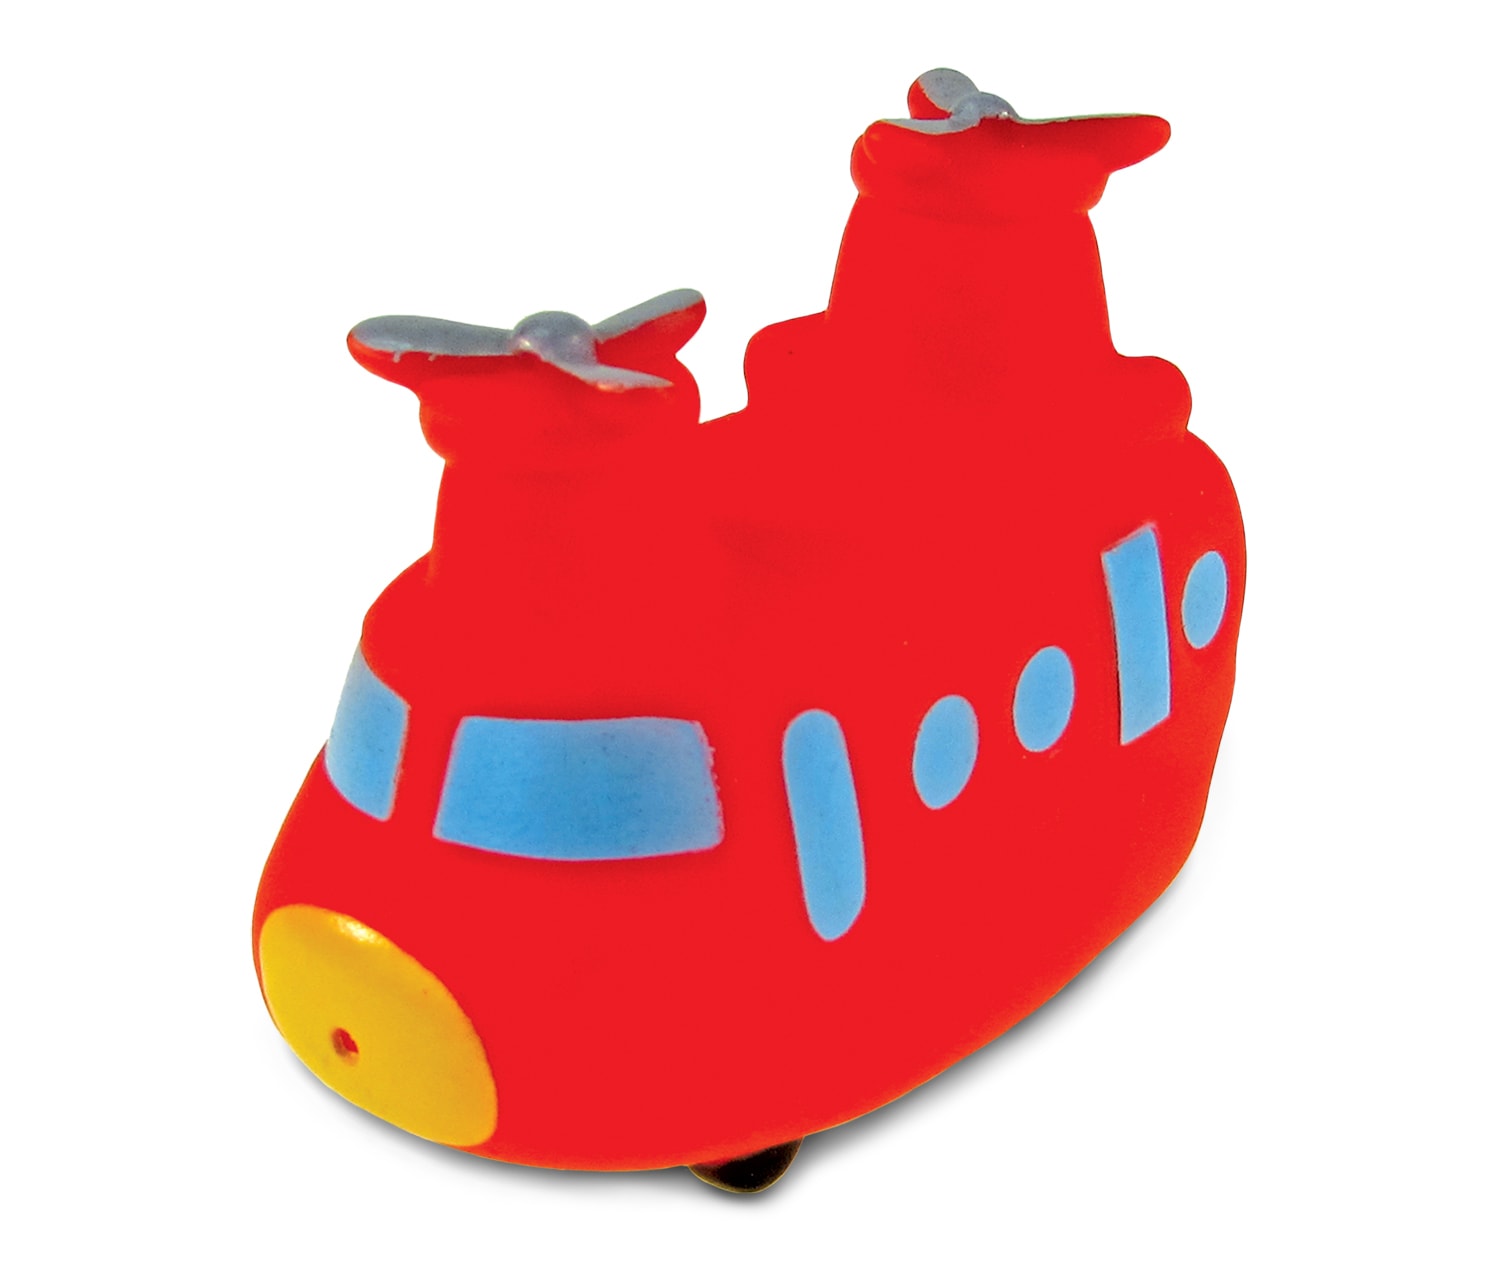 Sea Knight Helicopter – Bath Buddies Squirter